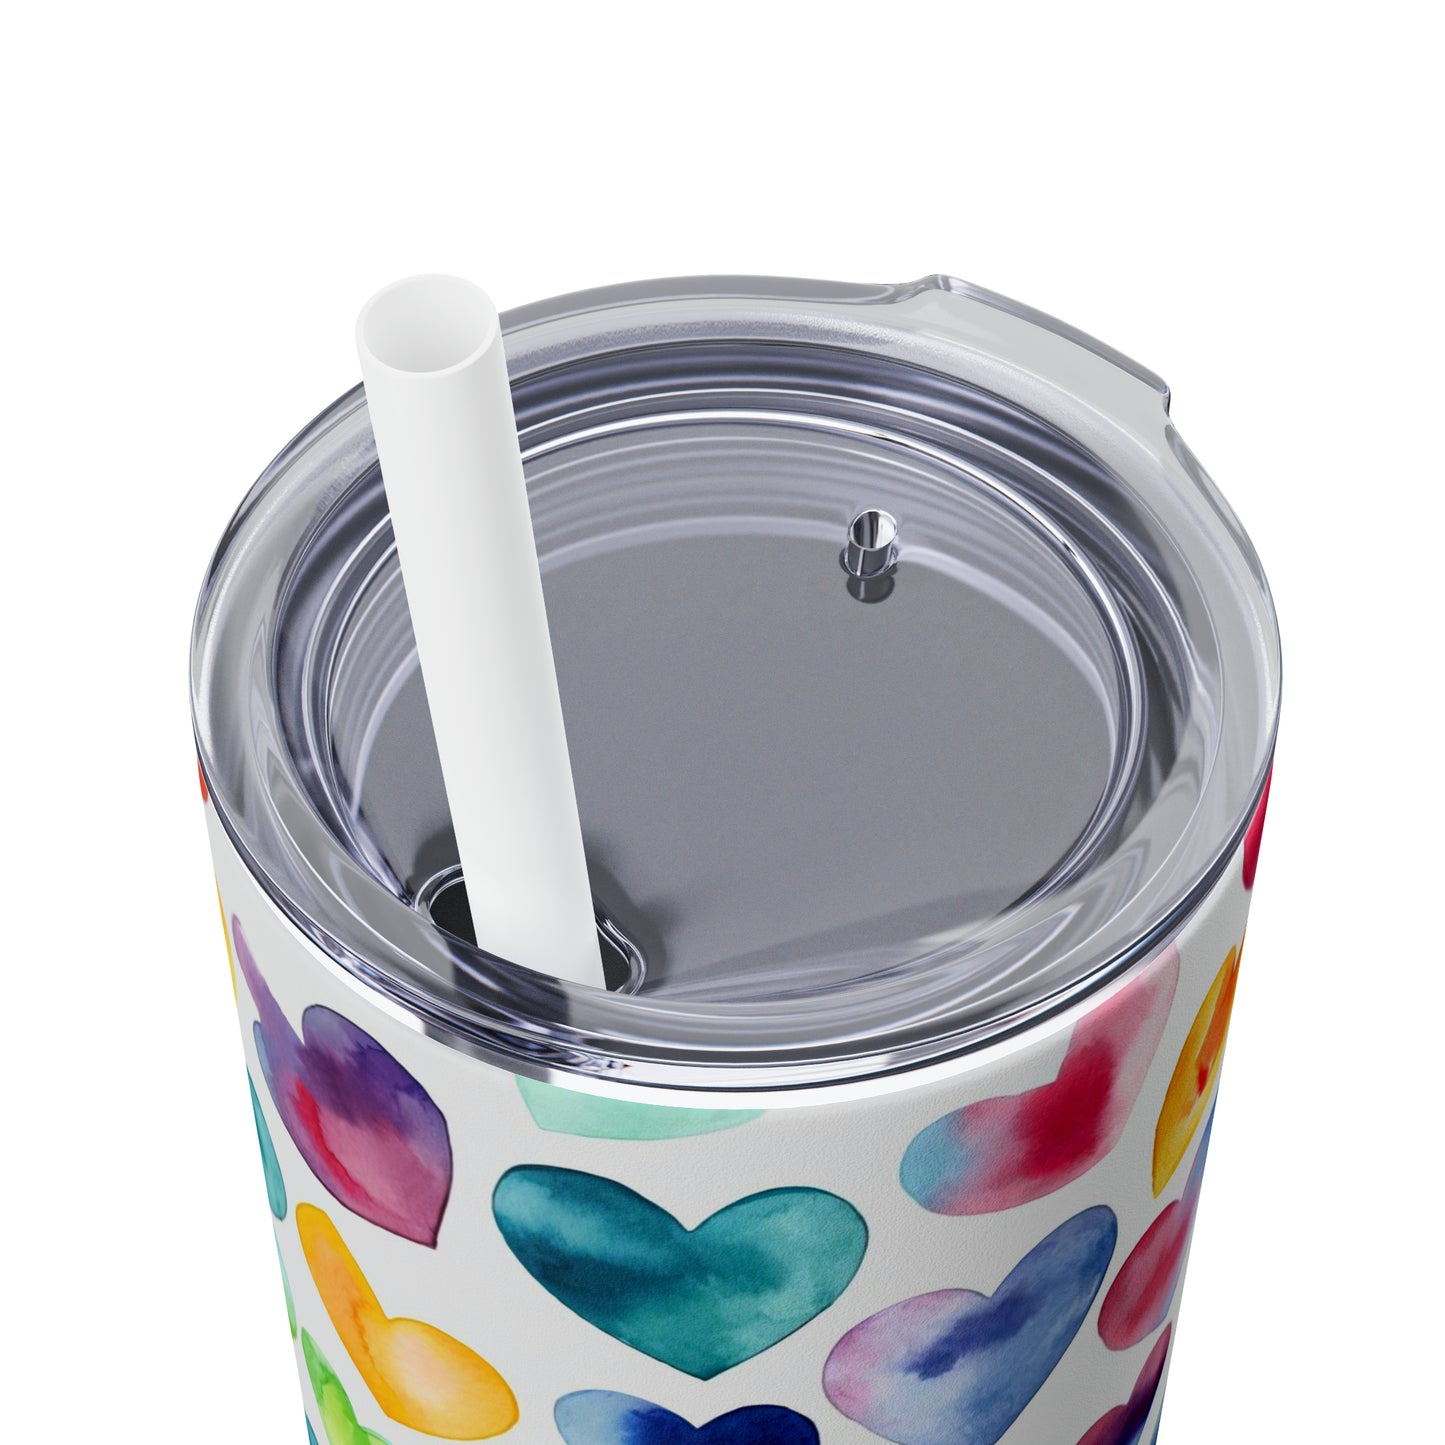 Watercolor Hearts - Rainbow - Multi - Skinny Tumbler with Straw, 20oz - Stainless Steel